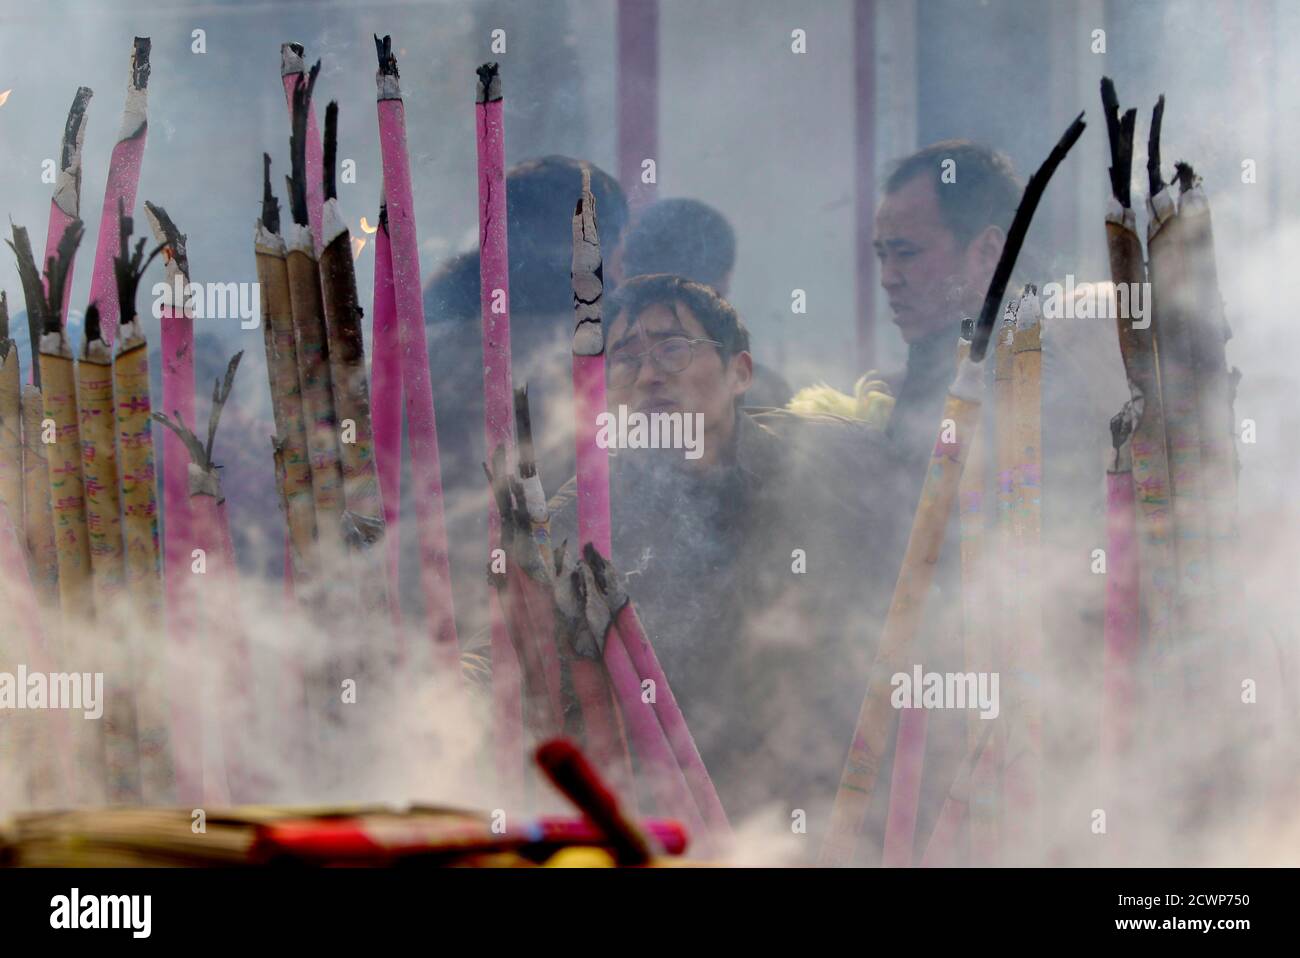 Local residents burn incense as they pray for good fortune outside Dafo Temple on the Lantern Festival, the last day of Chinese Lunar New Year celebrations, in Zhengding County, Hebei province, February 6, 2012. REUTERS/Jason Lee (CHINA - Tags: SOCIETY RELIGION) Stock Photo